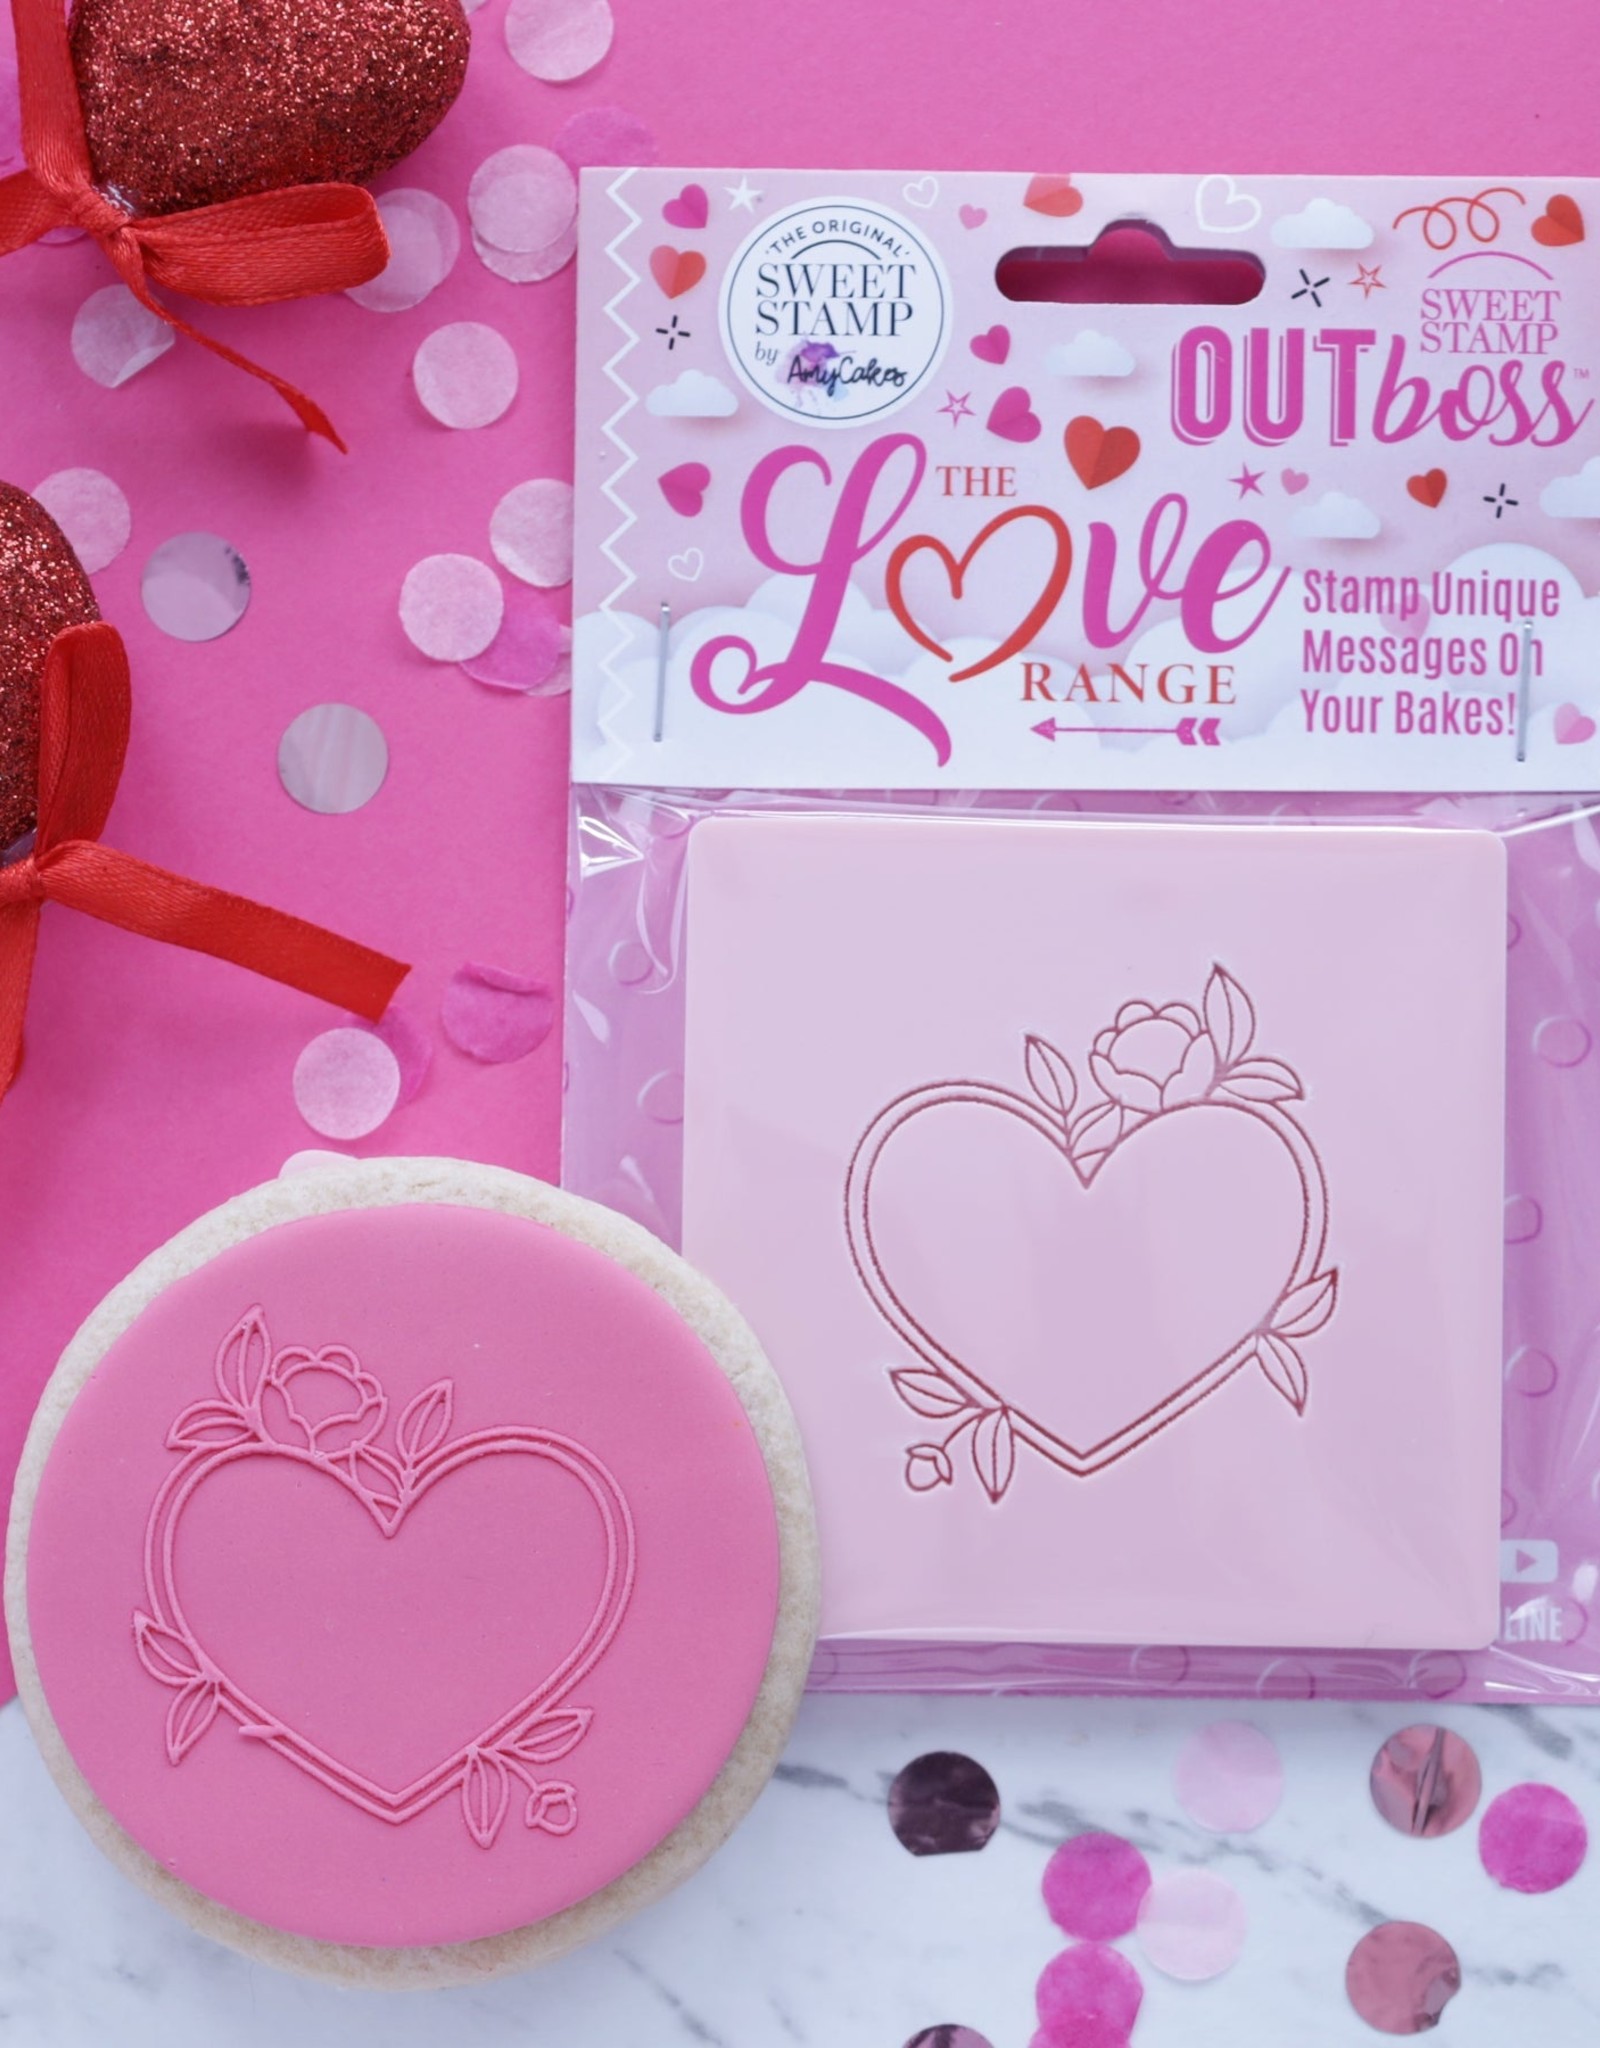 Sweet Stamp Sweet Stamp Outboss Heart Floral Frame